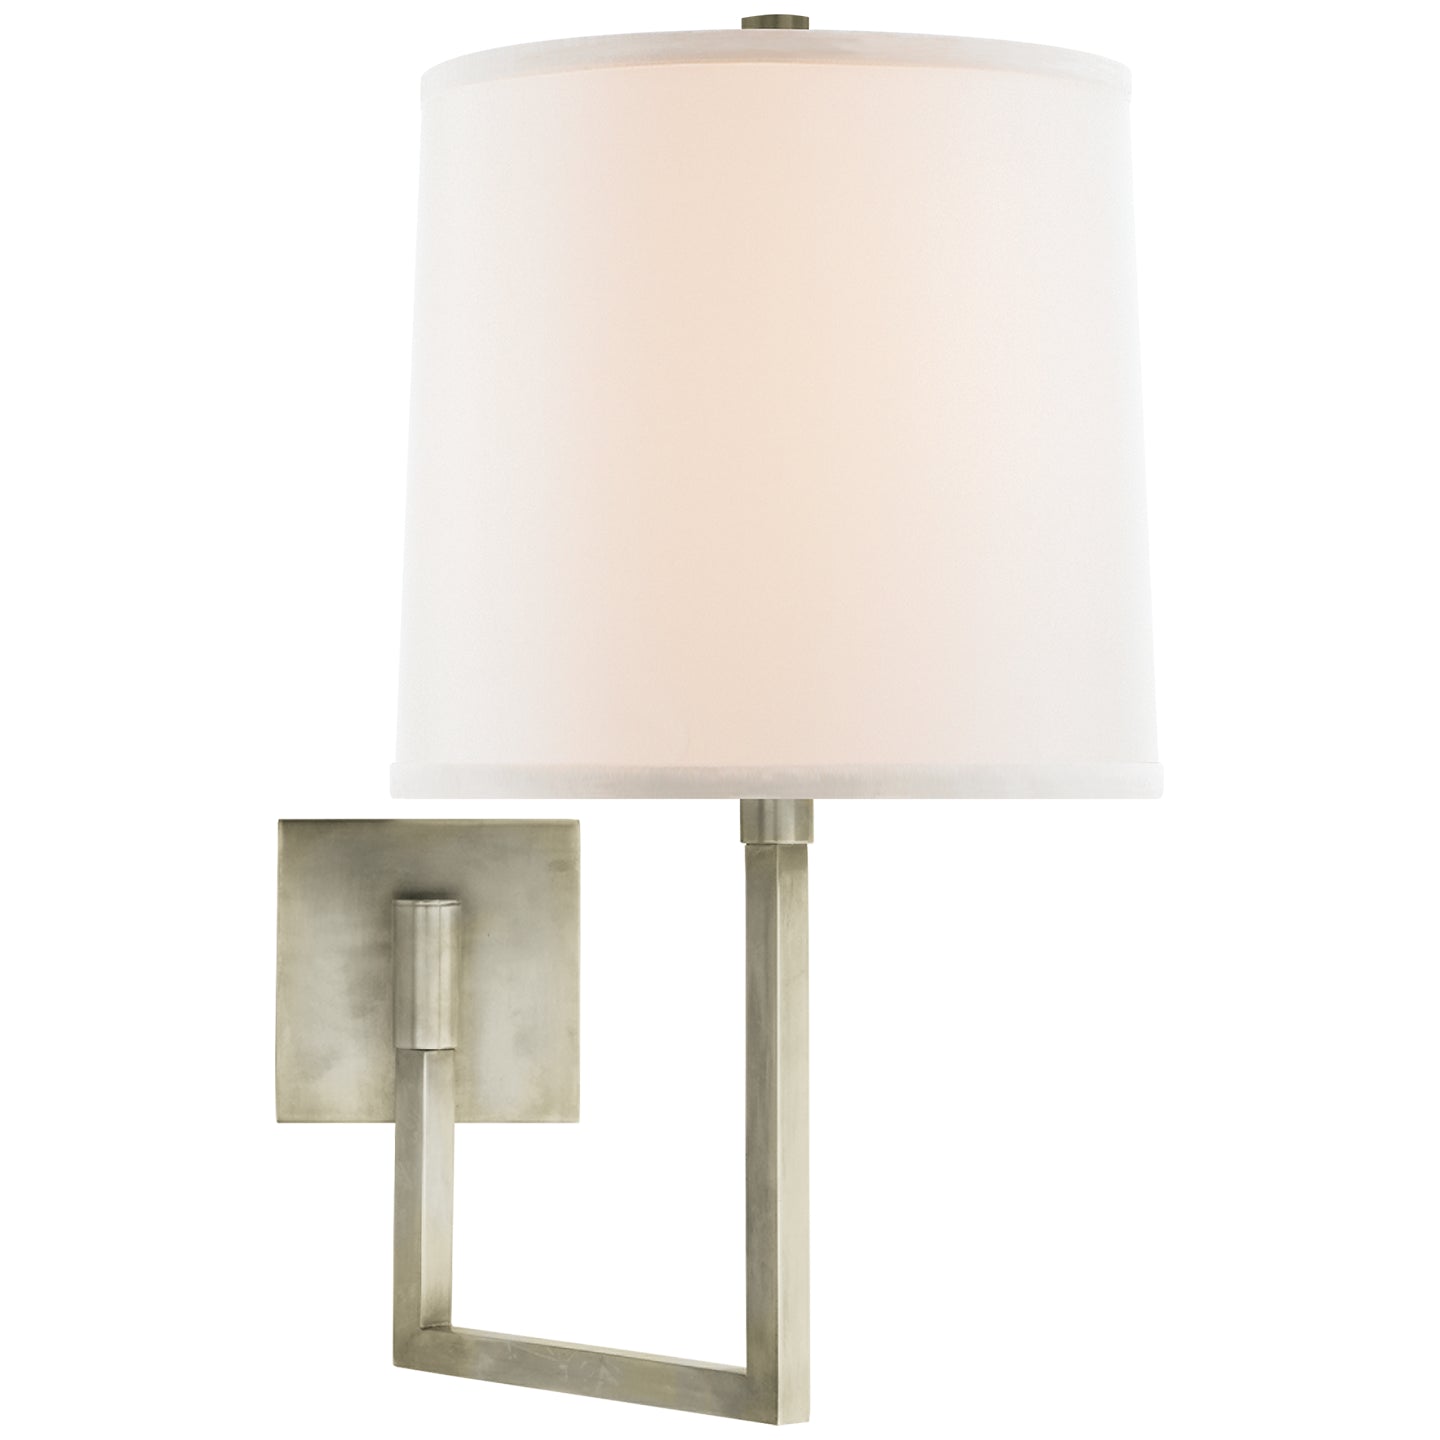 Visual Comfort Signature - BBL 2029PWT-L - One Light Wall Sconce - Aspect - Pewter